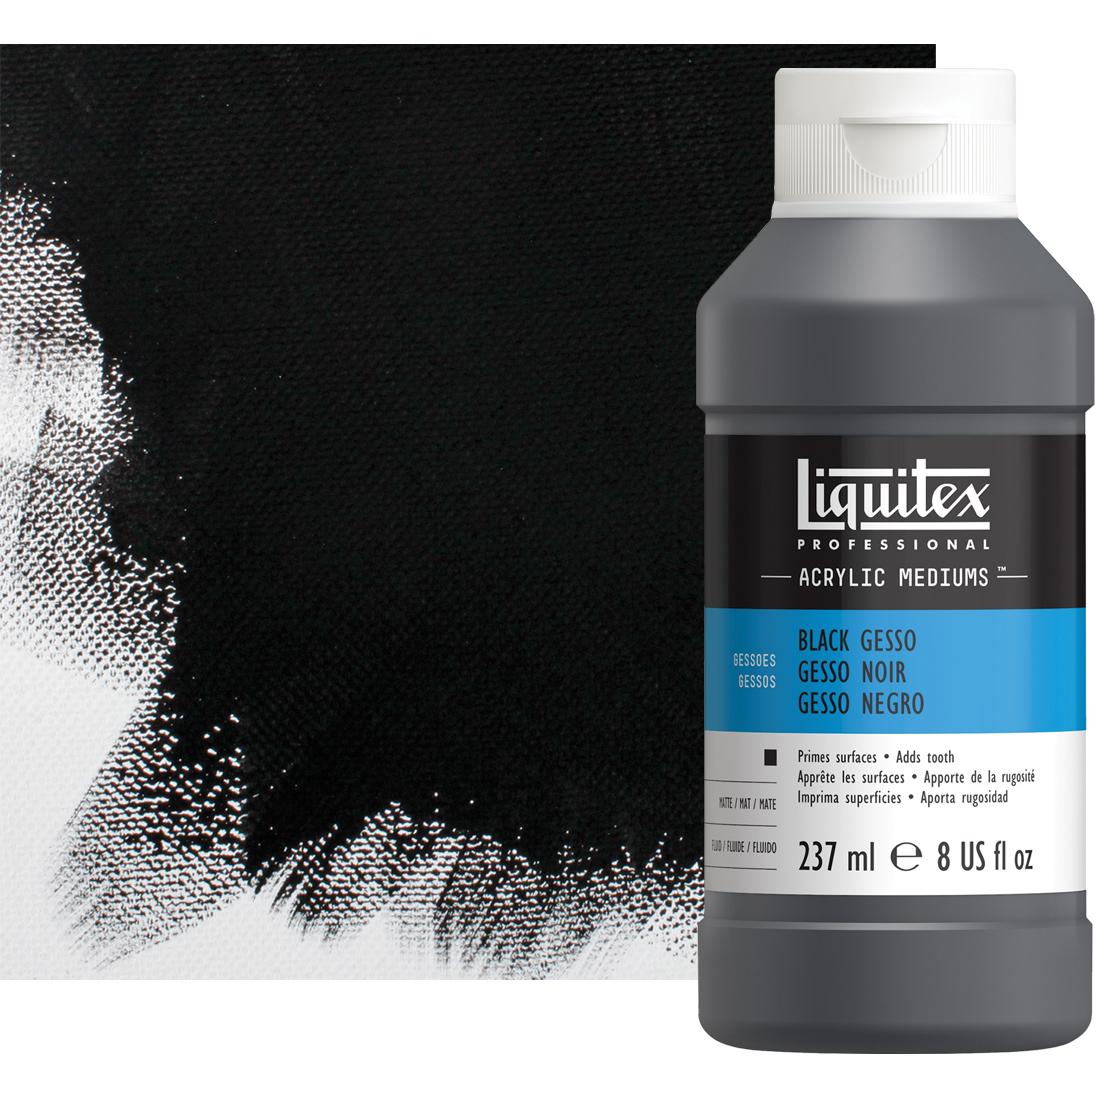 8 oz. bottle of black Liquitex Acrylic Gesso, with sample of product in the background